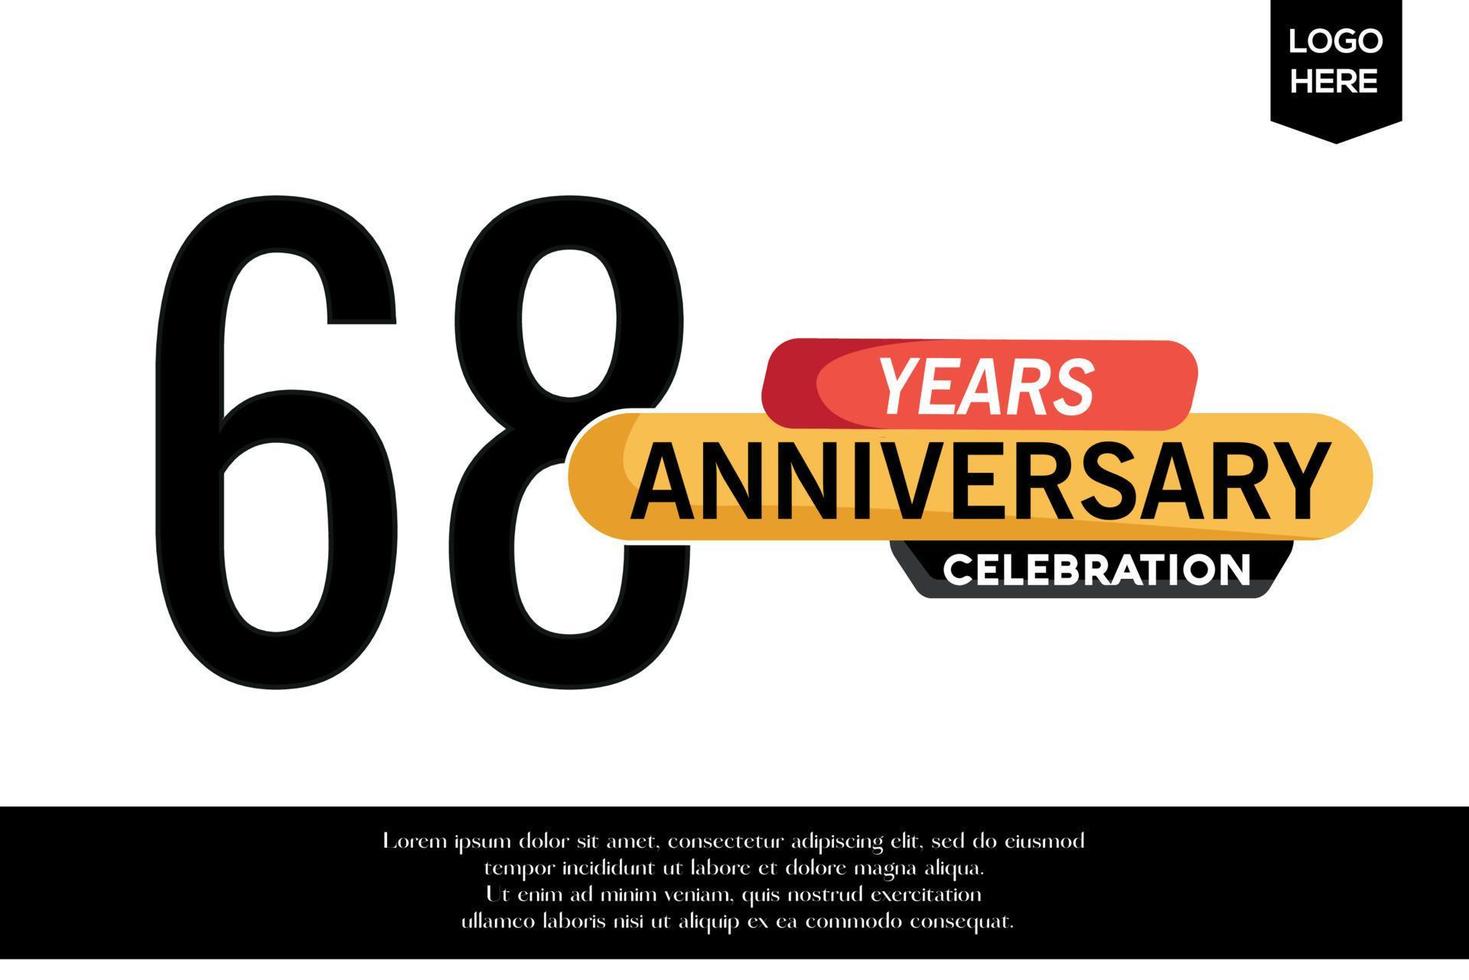 68th anniversary celebration logotype black yellow colored with text in gray color isolated on white background vector template design